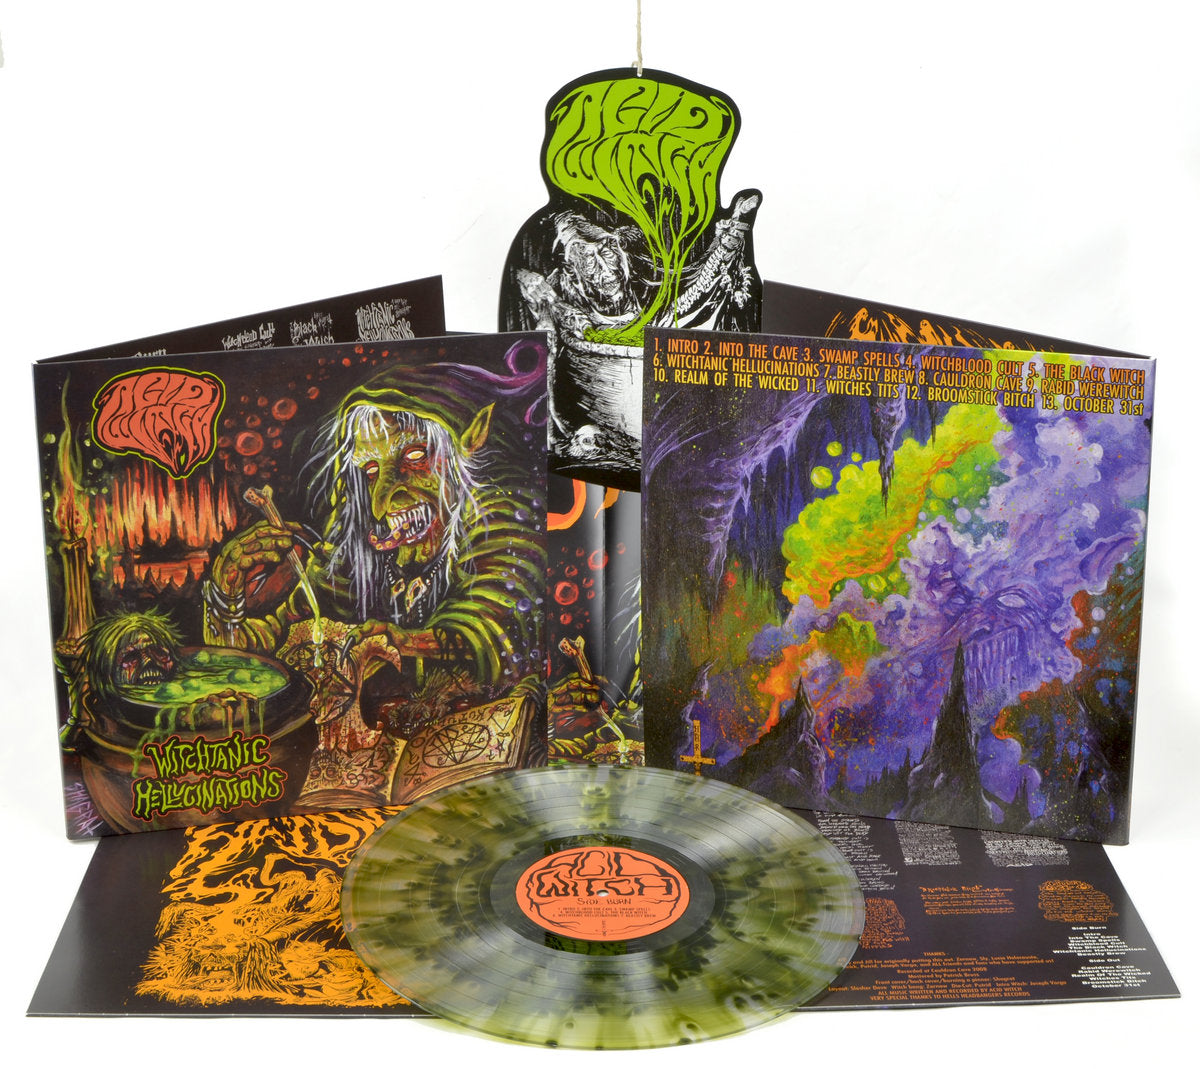 ACID WITCH – Witchtanic Hellucinations LP